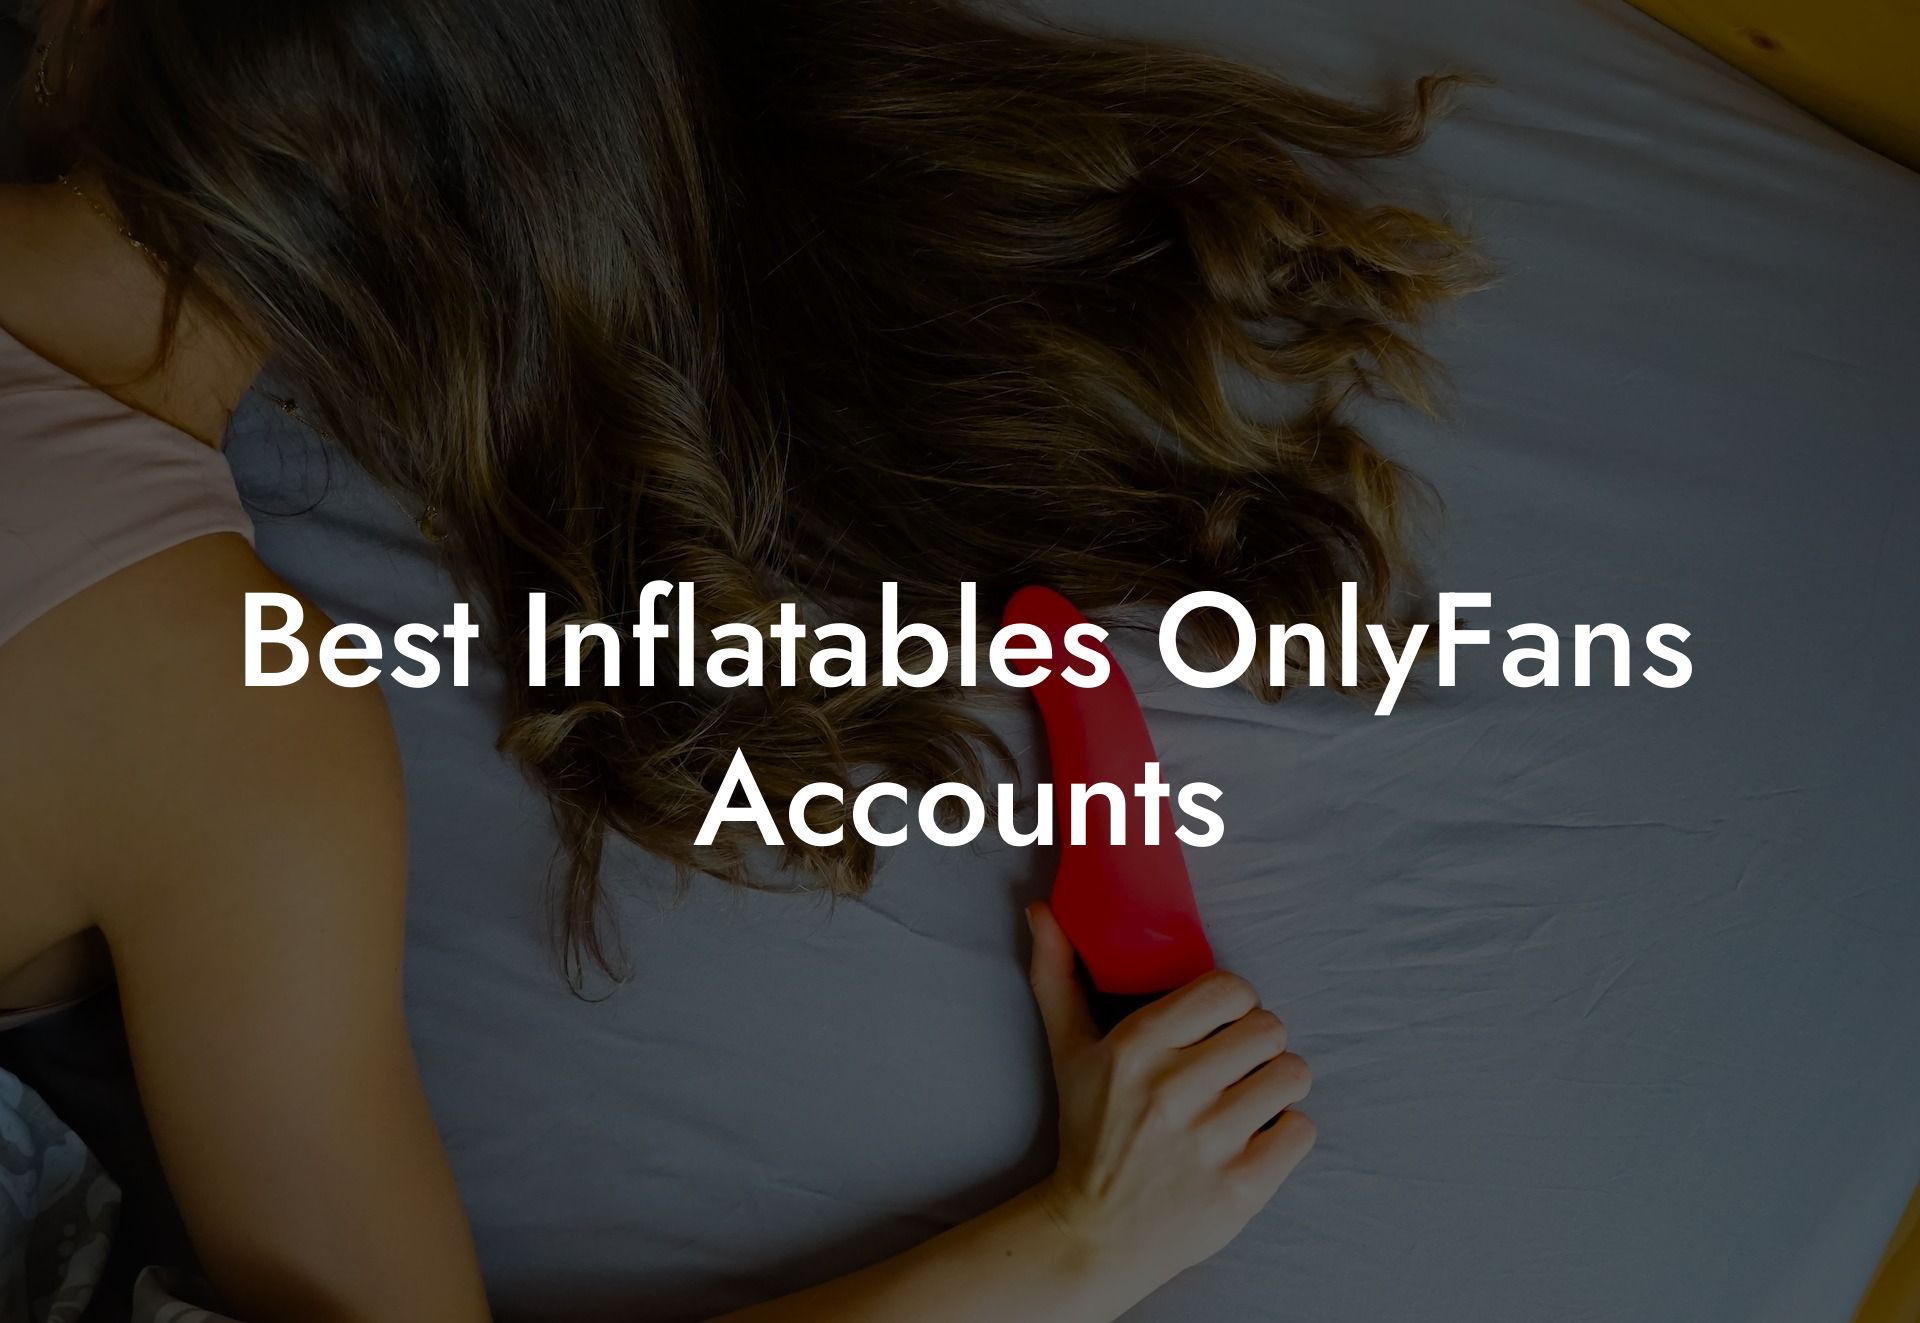 Best Inflatables OnlyFans Accounts